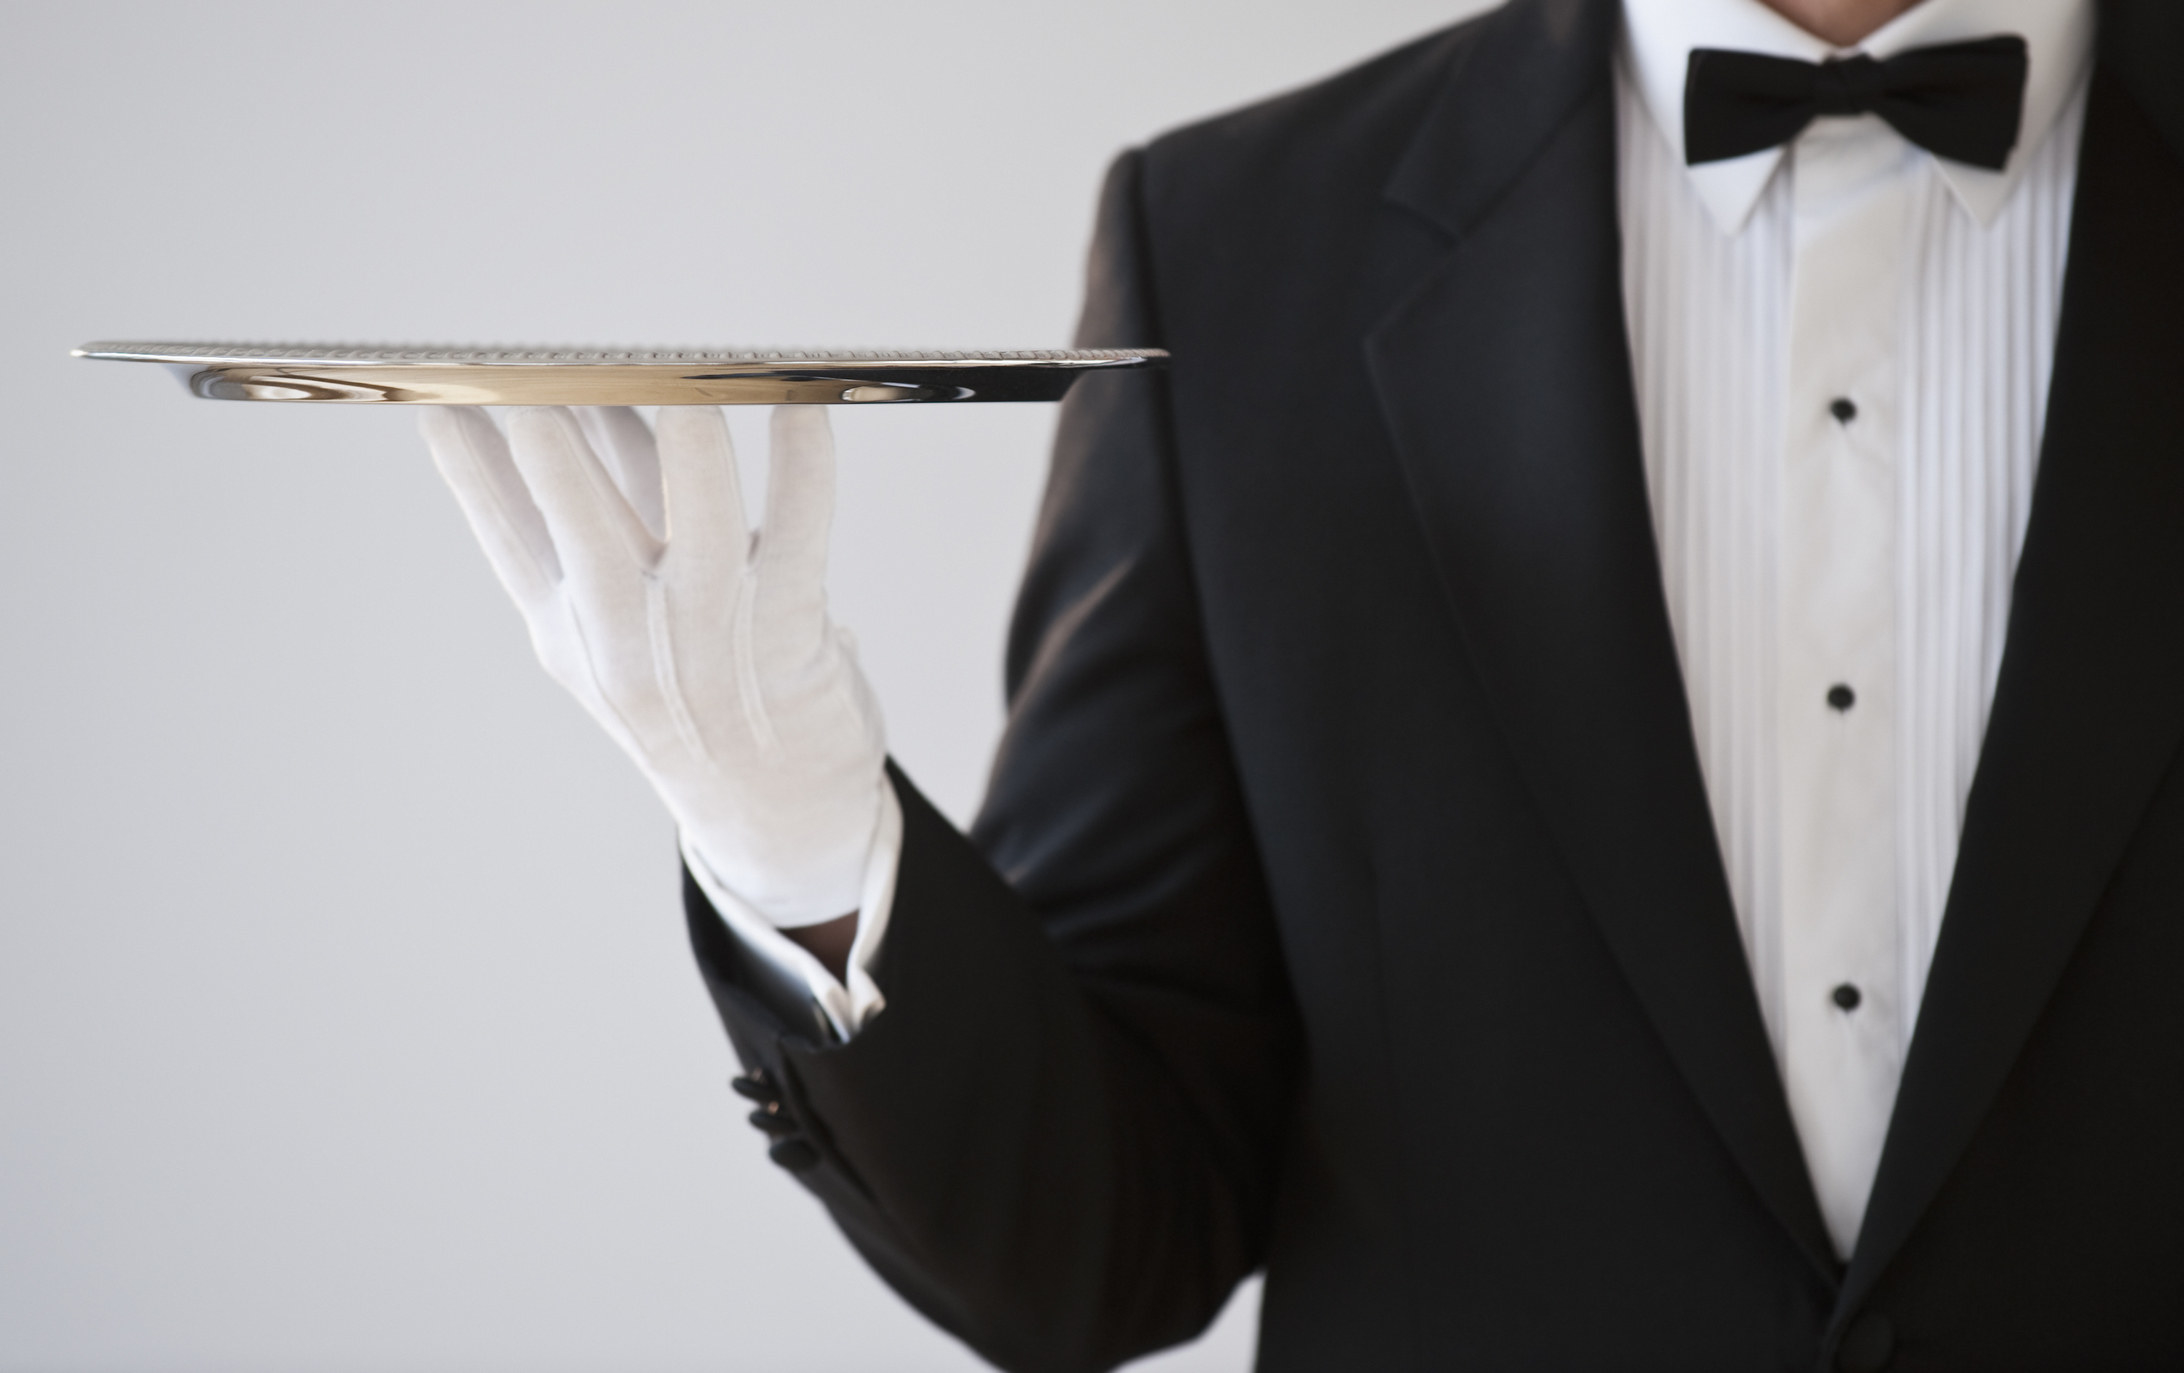 A person in a tuxedo and gloves holding a silver serving tray